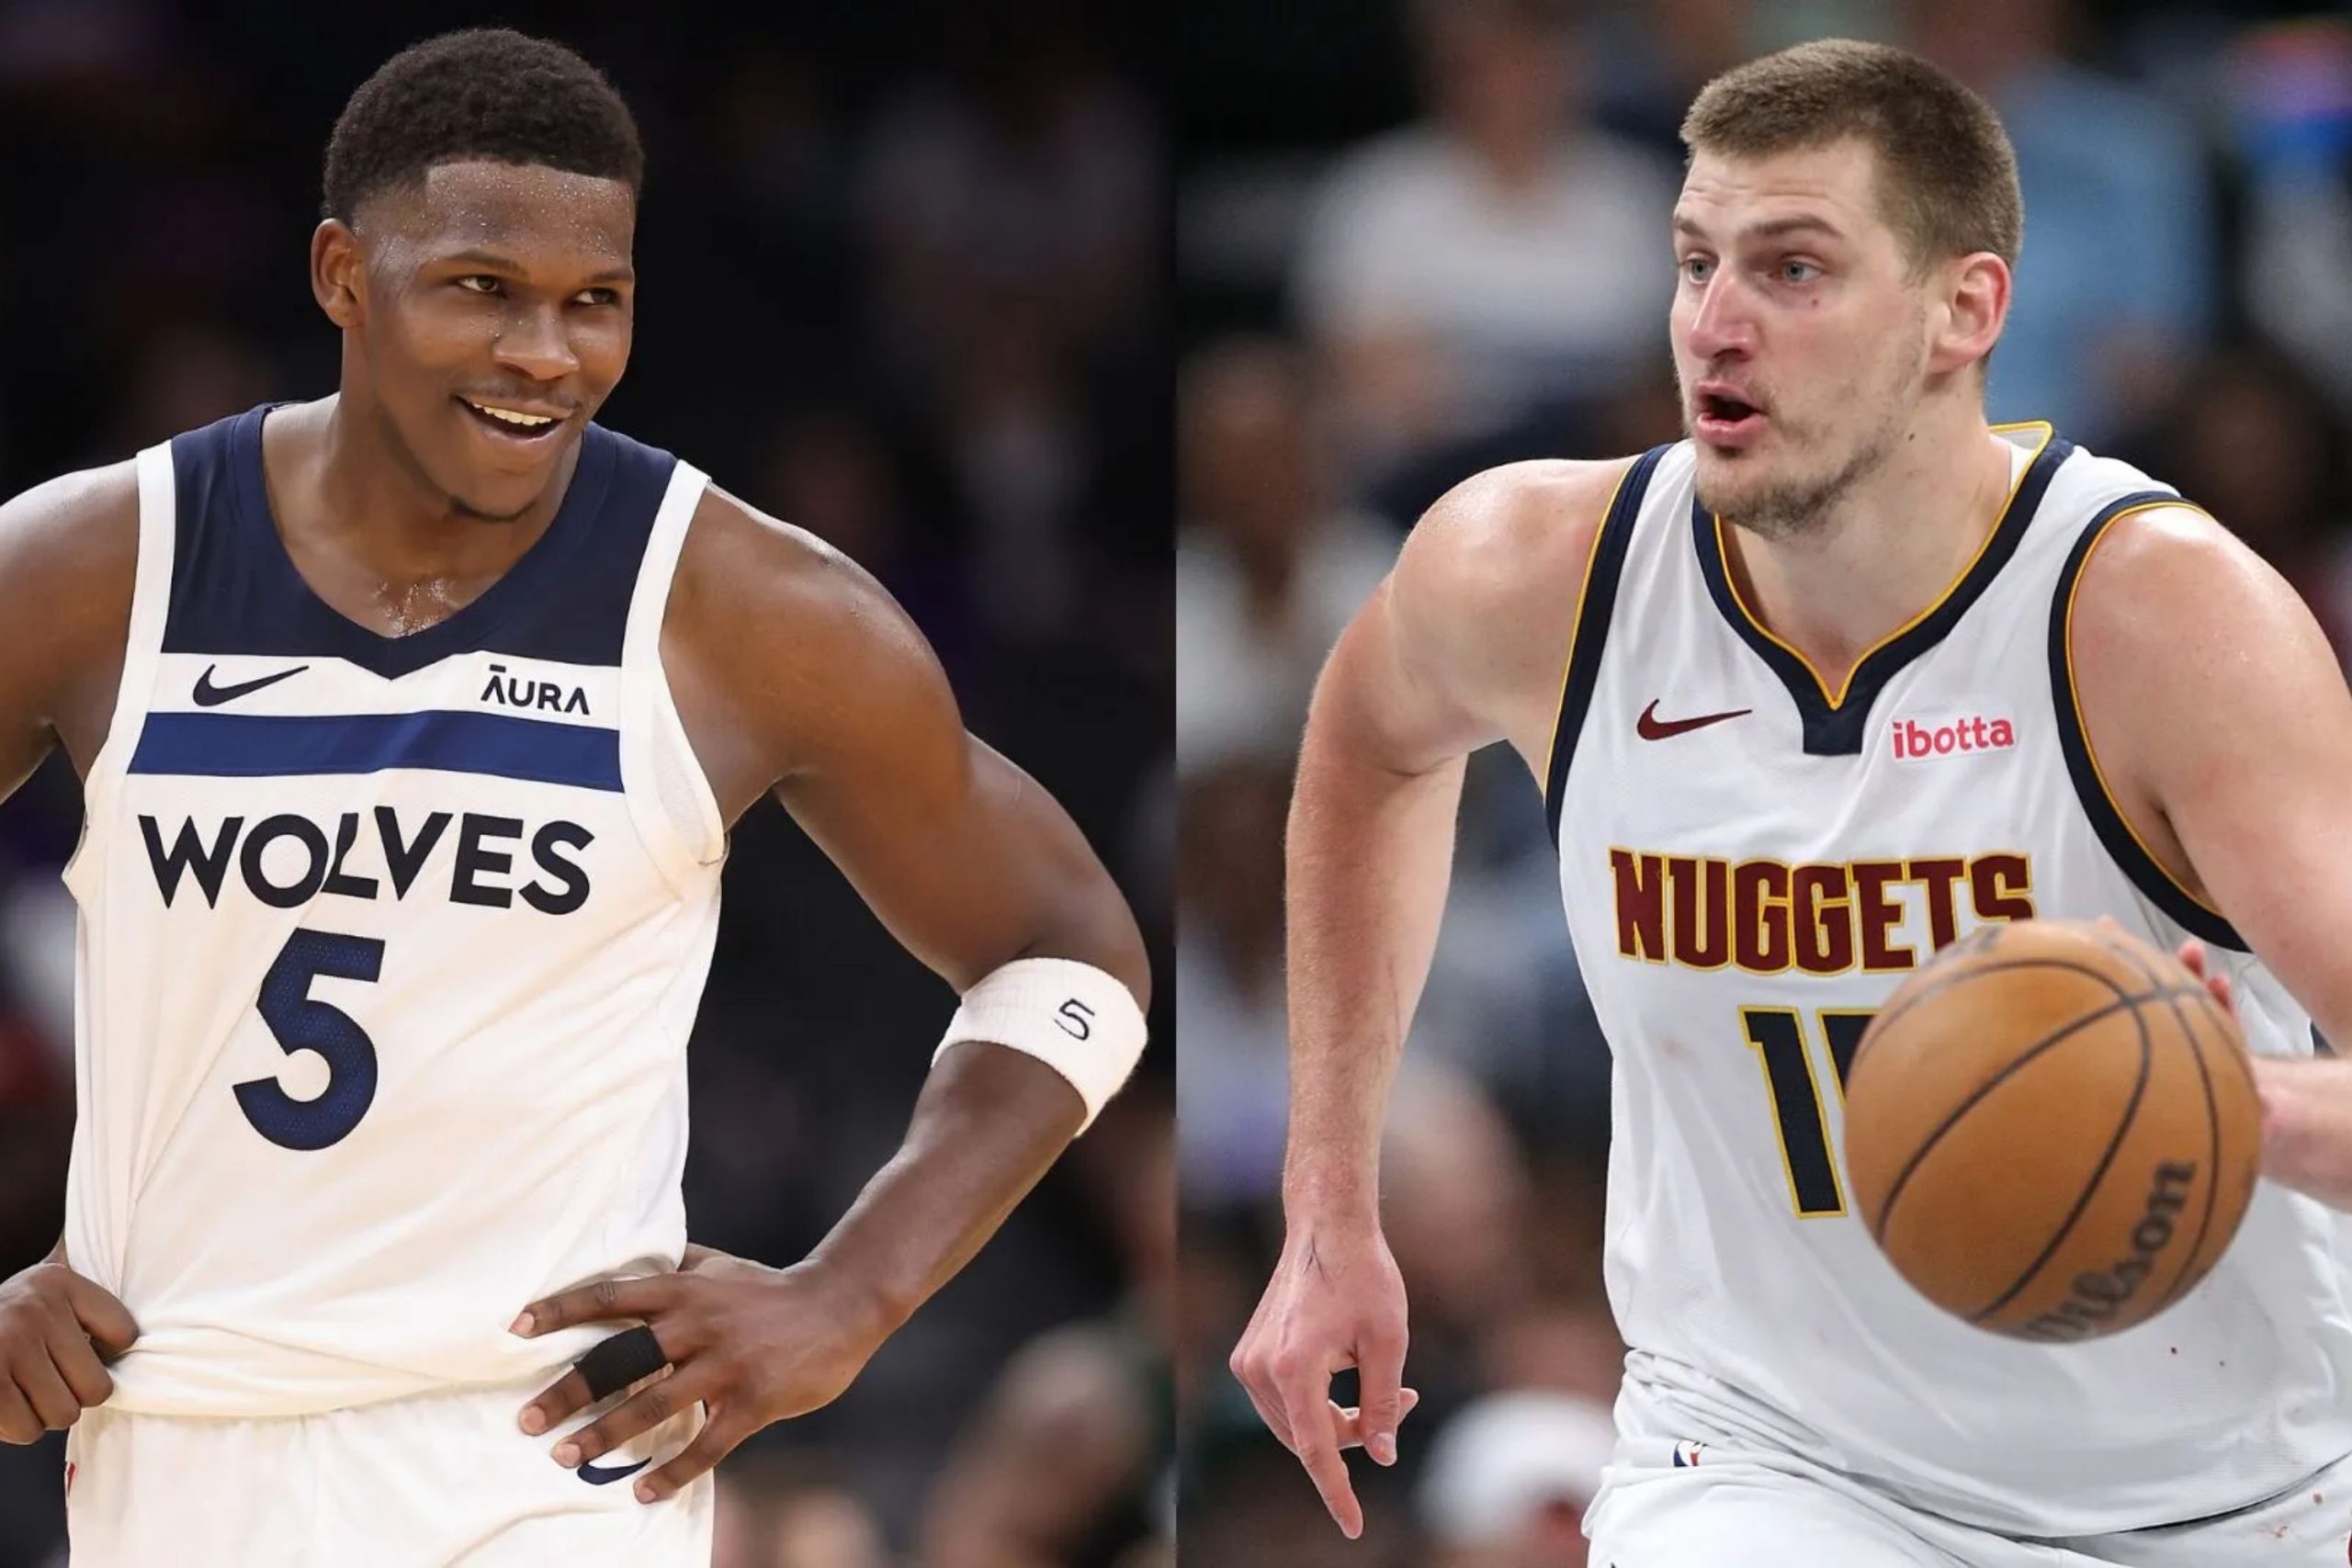 Minnesota Timberwolves vs Denver Nuggets: A Deep Analysis into Game 2 of the Western Conference Semifinals